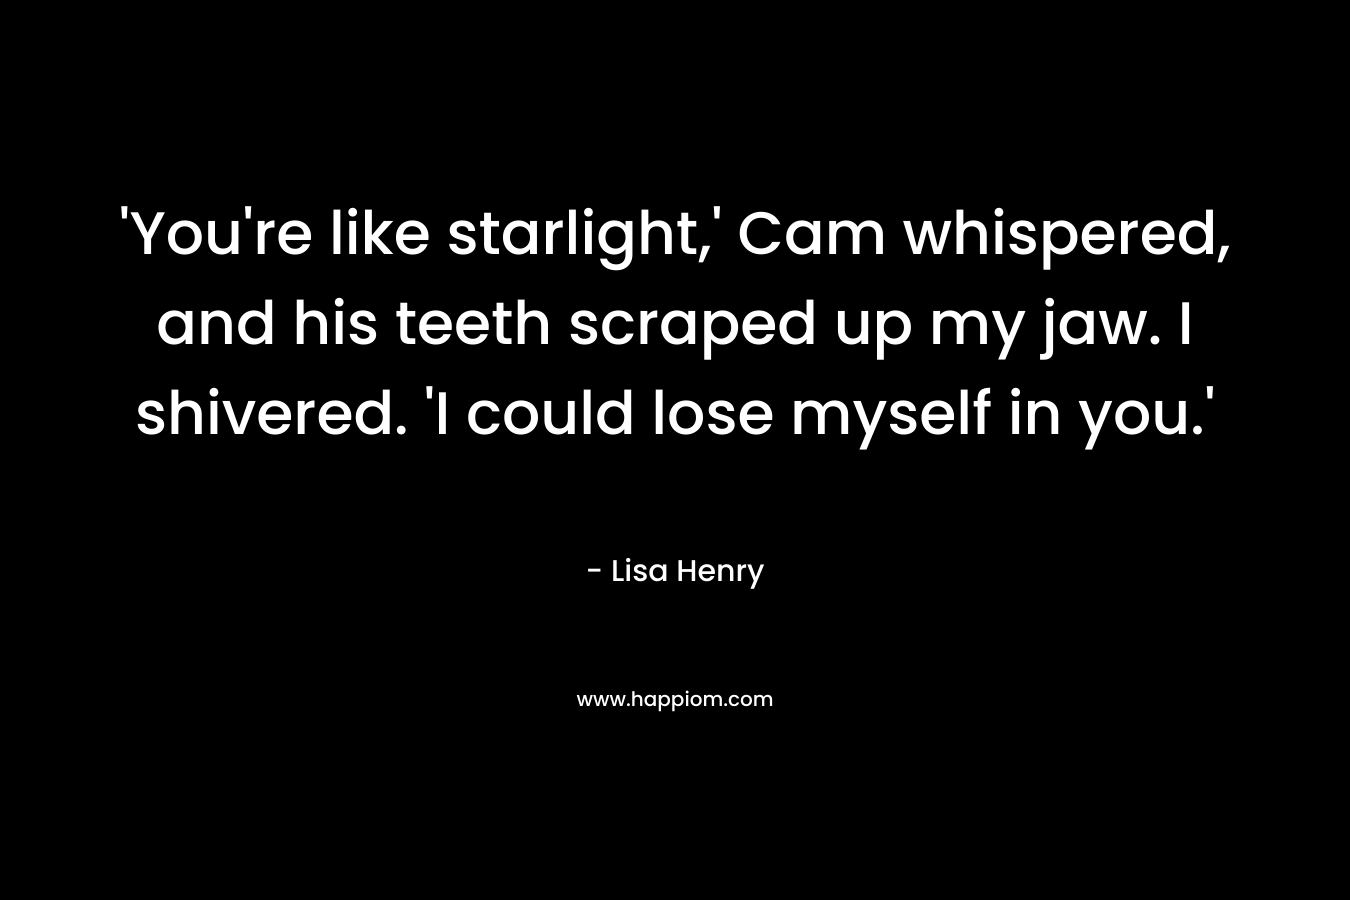  'You're like starlight,' Cam whispered, and his teeth scraped up my jaw. I shivered. 'I could lose myself in you.' 